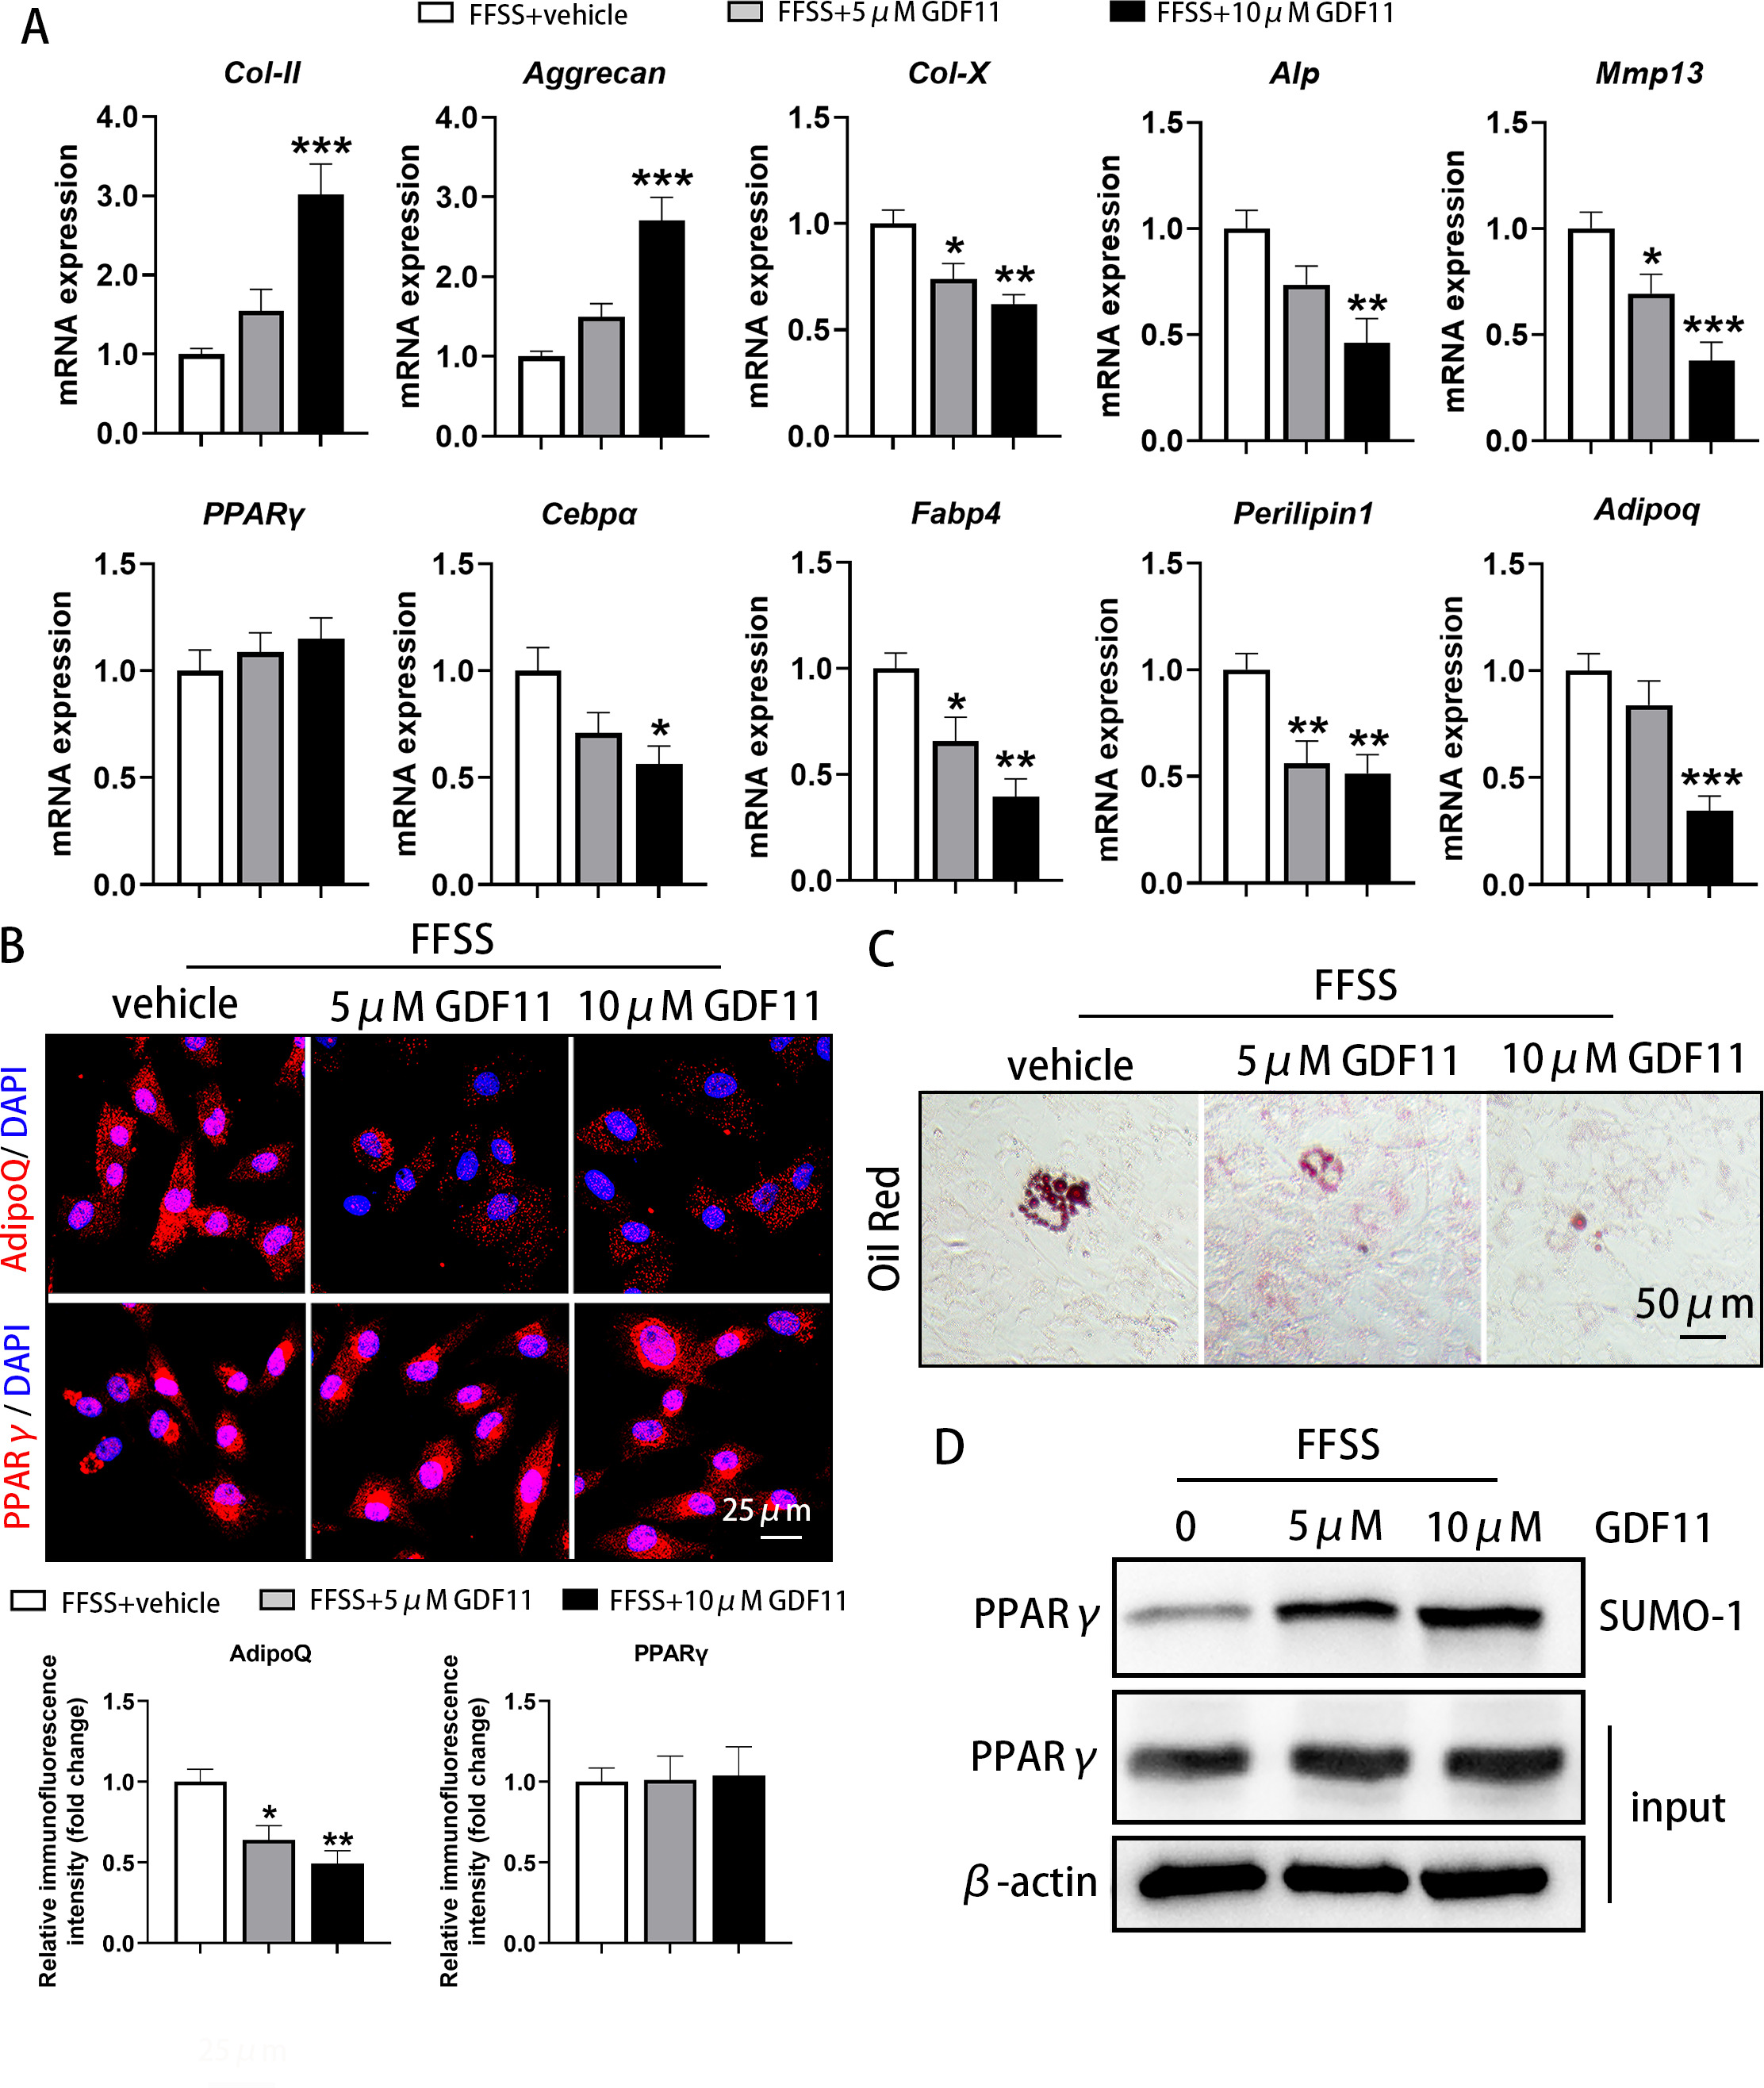 Fig. 4 
            Exogenous growth differentiation factor 11 (GDF11) alleviated the abnormal adipogenesis and differentiation of condylar chondrocytes induced by fluid flow shear stress (FFSS). a) Exogenous GDF11 increased the messenger RNA (mRNA) expression of type II collagen (Col-II) and Aggrecan, and decreased the mRNA expression of type X collagen (Col-X), alkaline phosphatase (ALP), matrix metallopeptidase 13 (Mmp13), CCAAT/enhancer-binding protein α (Cebpα), fatty acid binding protein 4 (Fabp4), Perilipin1, and Adiponectin (Adipoq) after FFSS stimulation in condylar chondrocytes when cultured in adipogenic induction medium for 21 days. However, it did not affect the changes in peroxisome proliferator-activated receptor γ (PPARγ) expression induced by FFSS. b) Exogenous GDF11 decreased the protein level of AdipoQ but had no influence on PPARγ expression in the cytoplasm of cultured condylar chondrocytes with adipogenic induction medium after FFSS stimulation. c) Exogenous GDF11 inhibited the enhanced formation of lipid droplets induced by FFSS in cultured condylar chondrocytes under adipogenic induction medium for 21 days. d) Exogenous GDF11 did not affect the FFSS-induced increase in PPARγ levels in the cytoplasm of cultured condylar chondrocytes, but it did significantly promote the post-translational modification by small ubiquitin-related modifier (SUMOylation) of PPARγ in chondrocytes when cultured in adipogenic induction medium for 21 days. *p < 0.05, **p < 0.01, ***p < 0.001 compared with the FFSS + vehicle group, one-way analysis of variance (ANOVA). DAPI, 4′,6-diamidino-2-phenylindole; SUMO, small ubiquitin-related modifier.
          